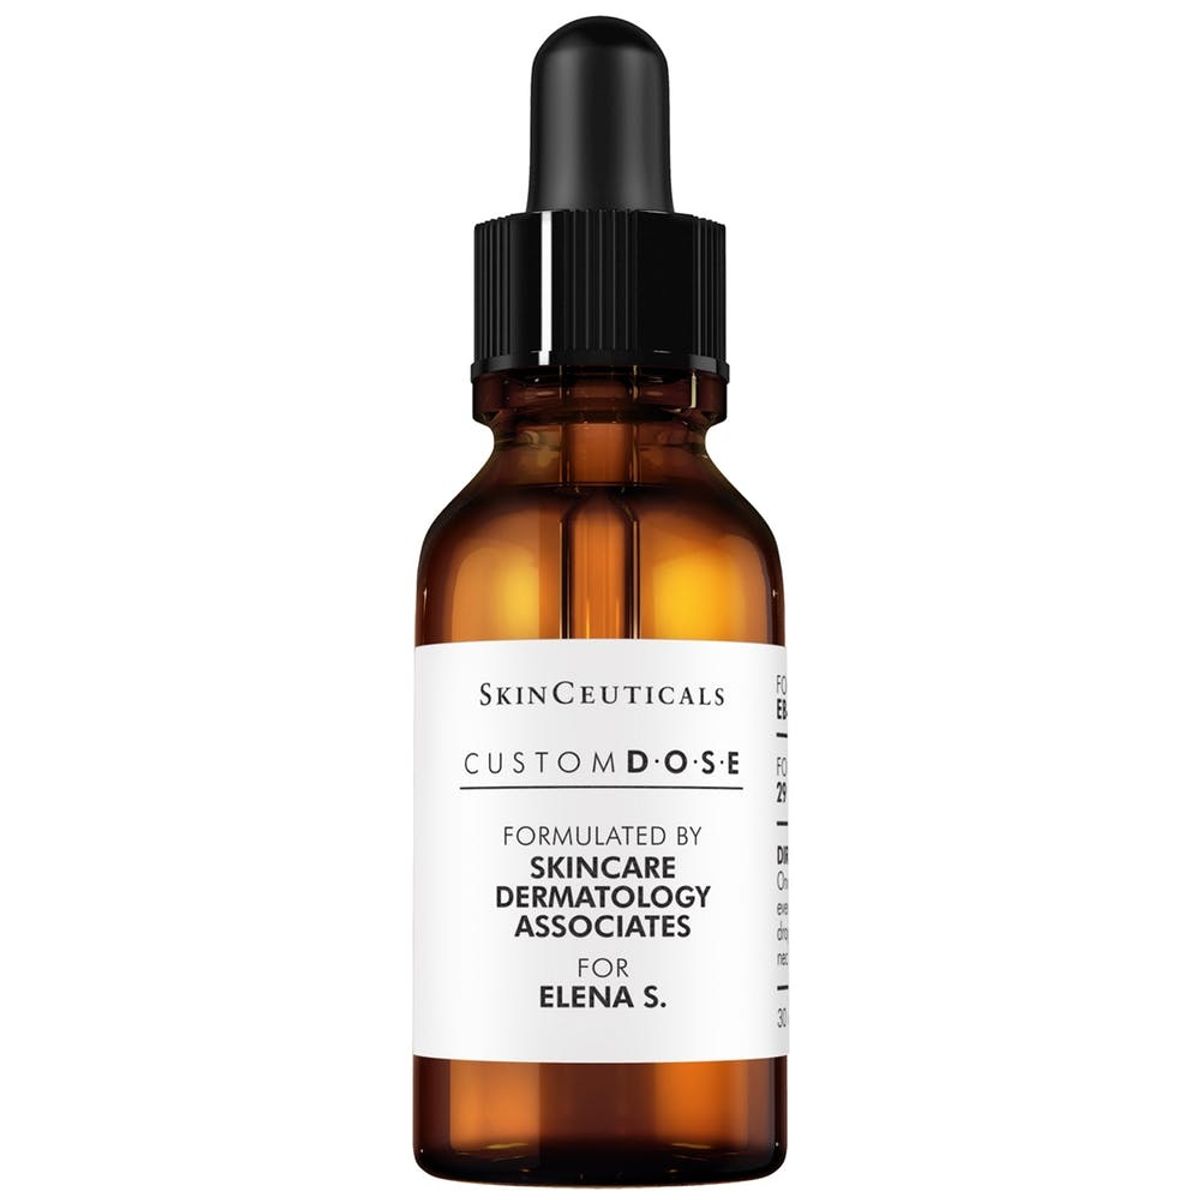 SkinCeuticals’ Newest Product Cocktails Your Whole Routine into One Serum